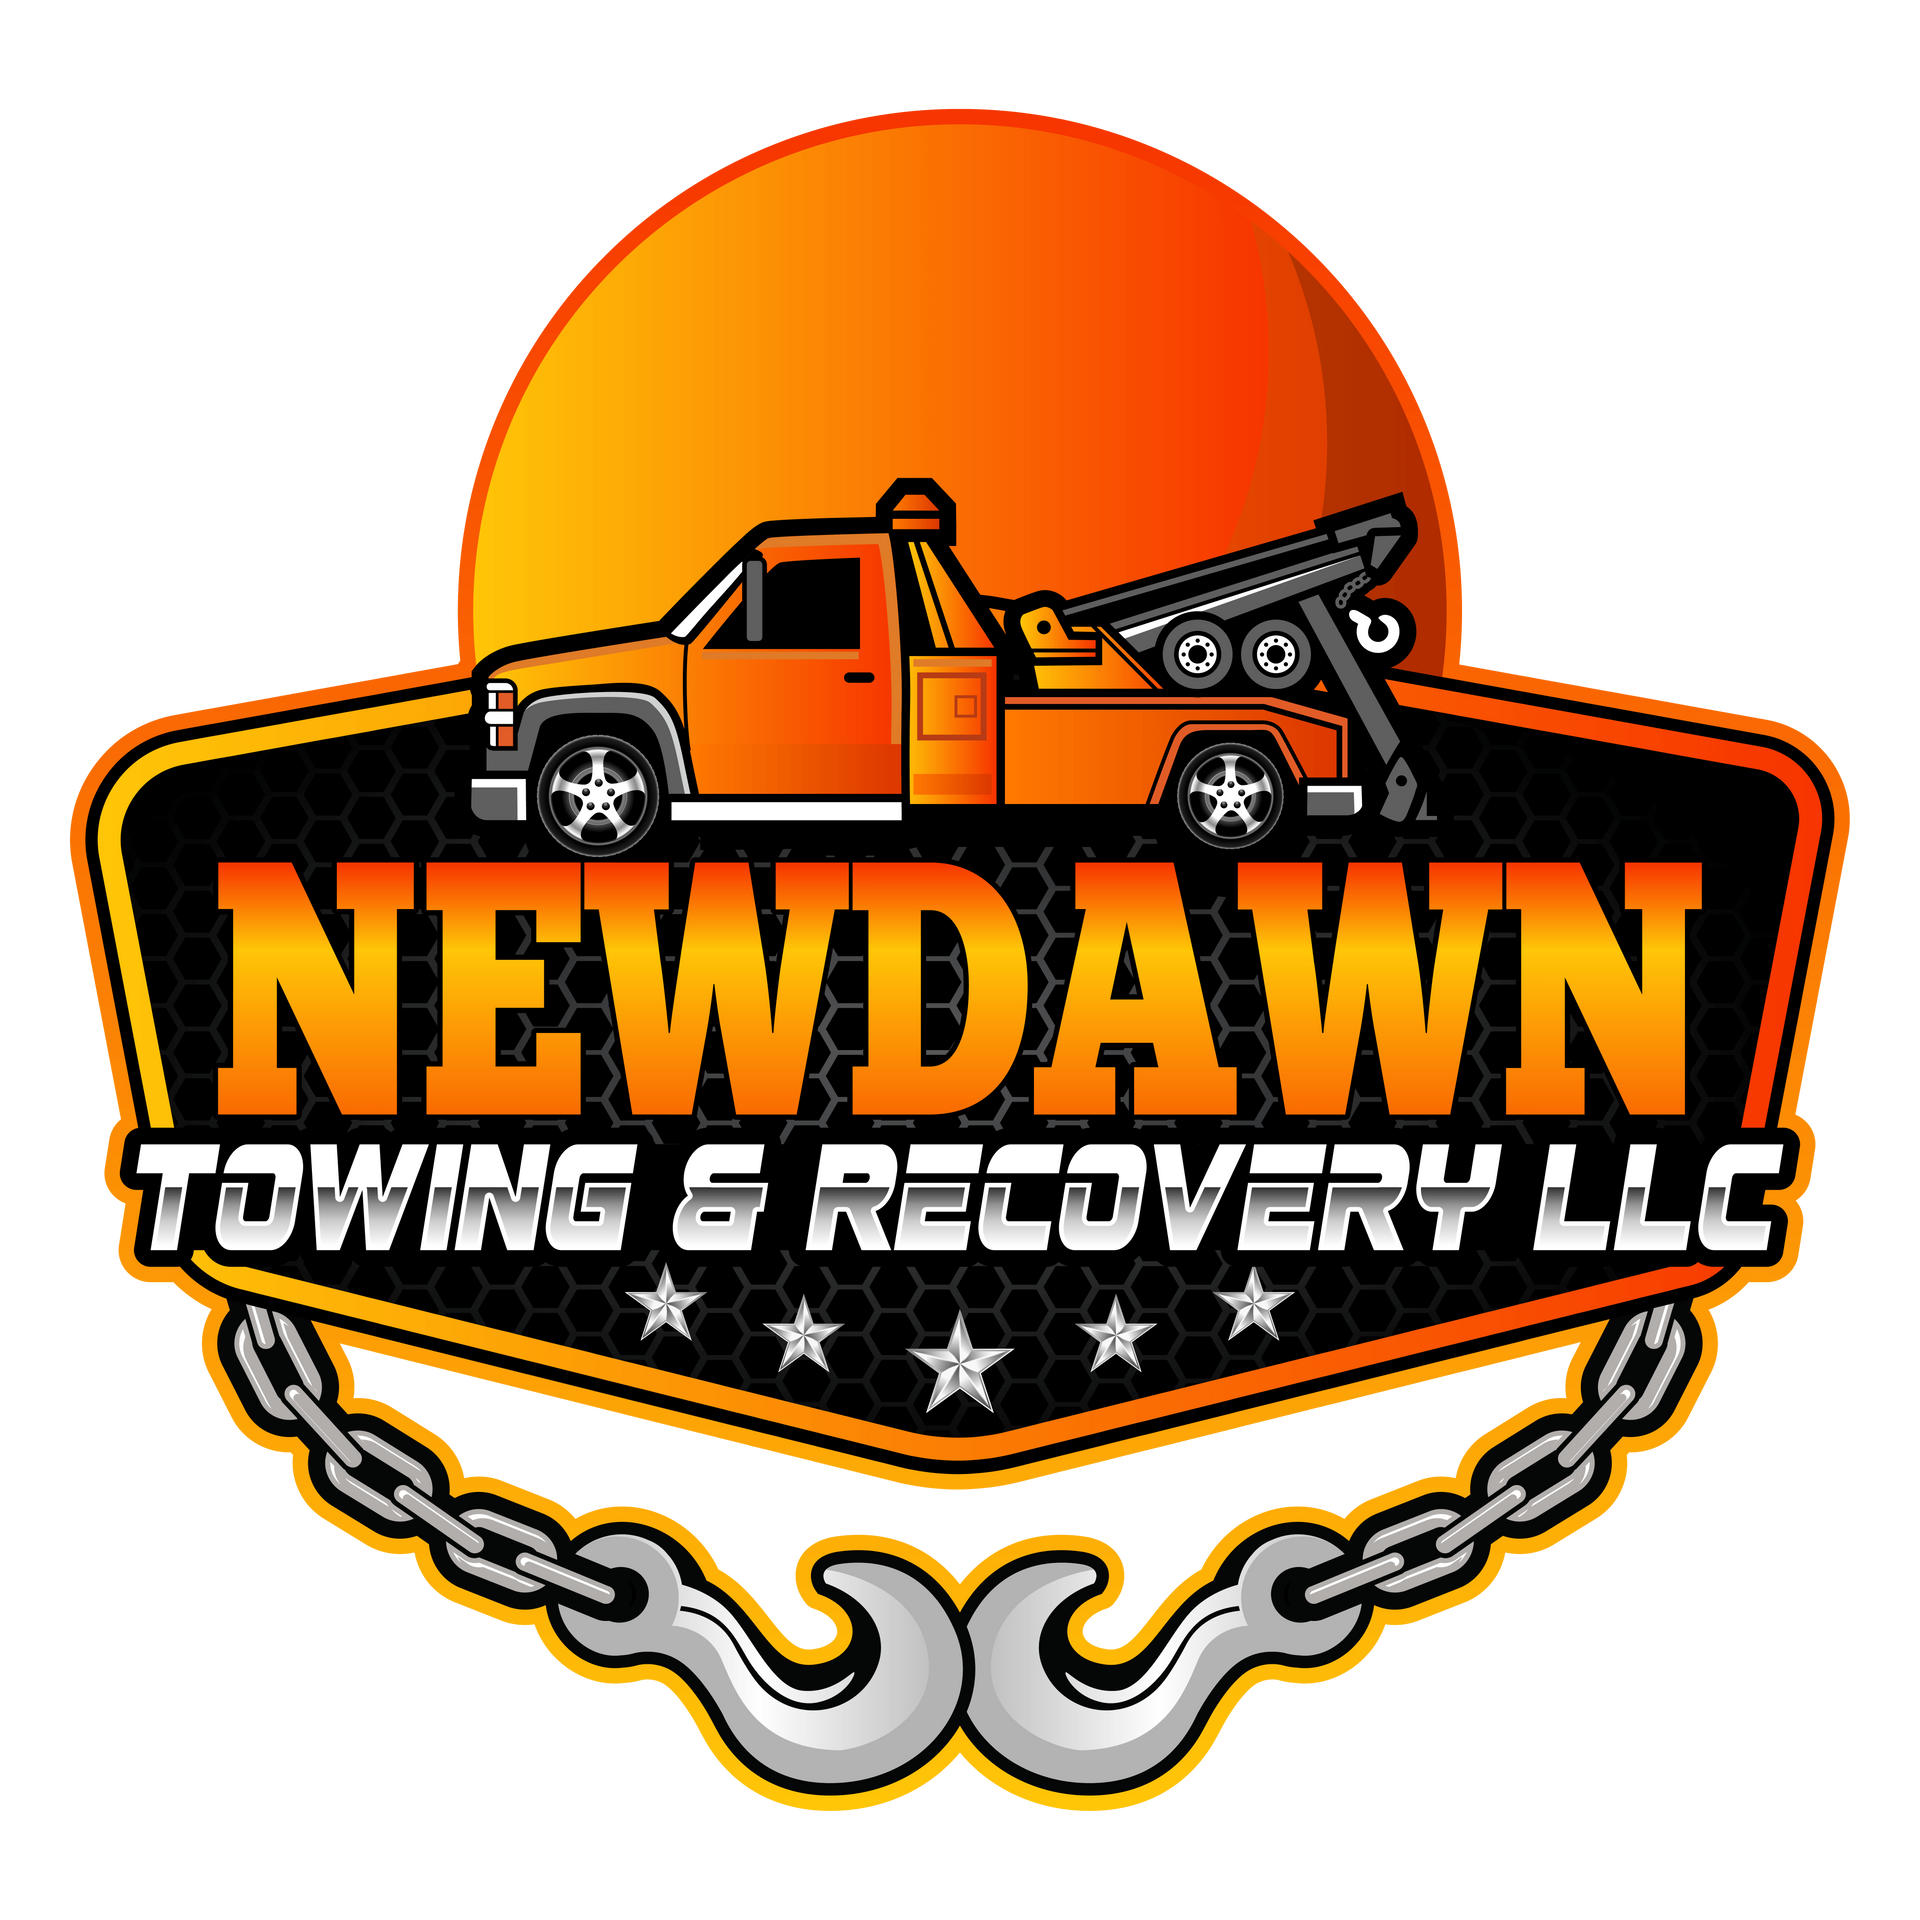 towing service in Cincinnati Oh - Newdawn Towing & Recovery LLC